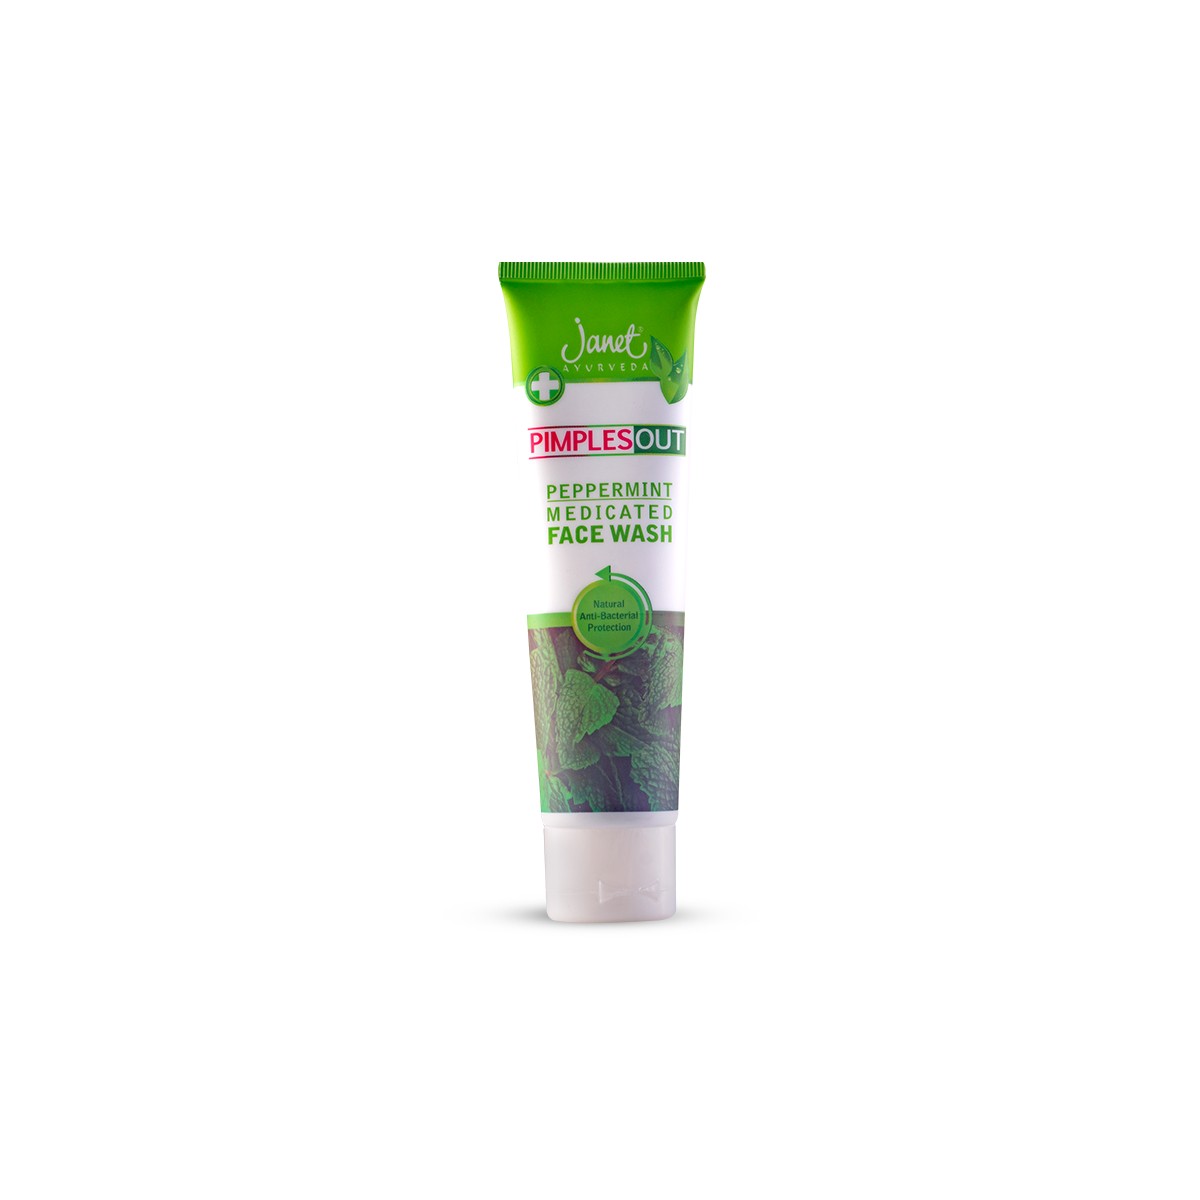 Pimples Out Peppermint Medicated Face Wash - 100 ML